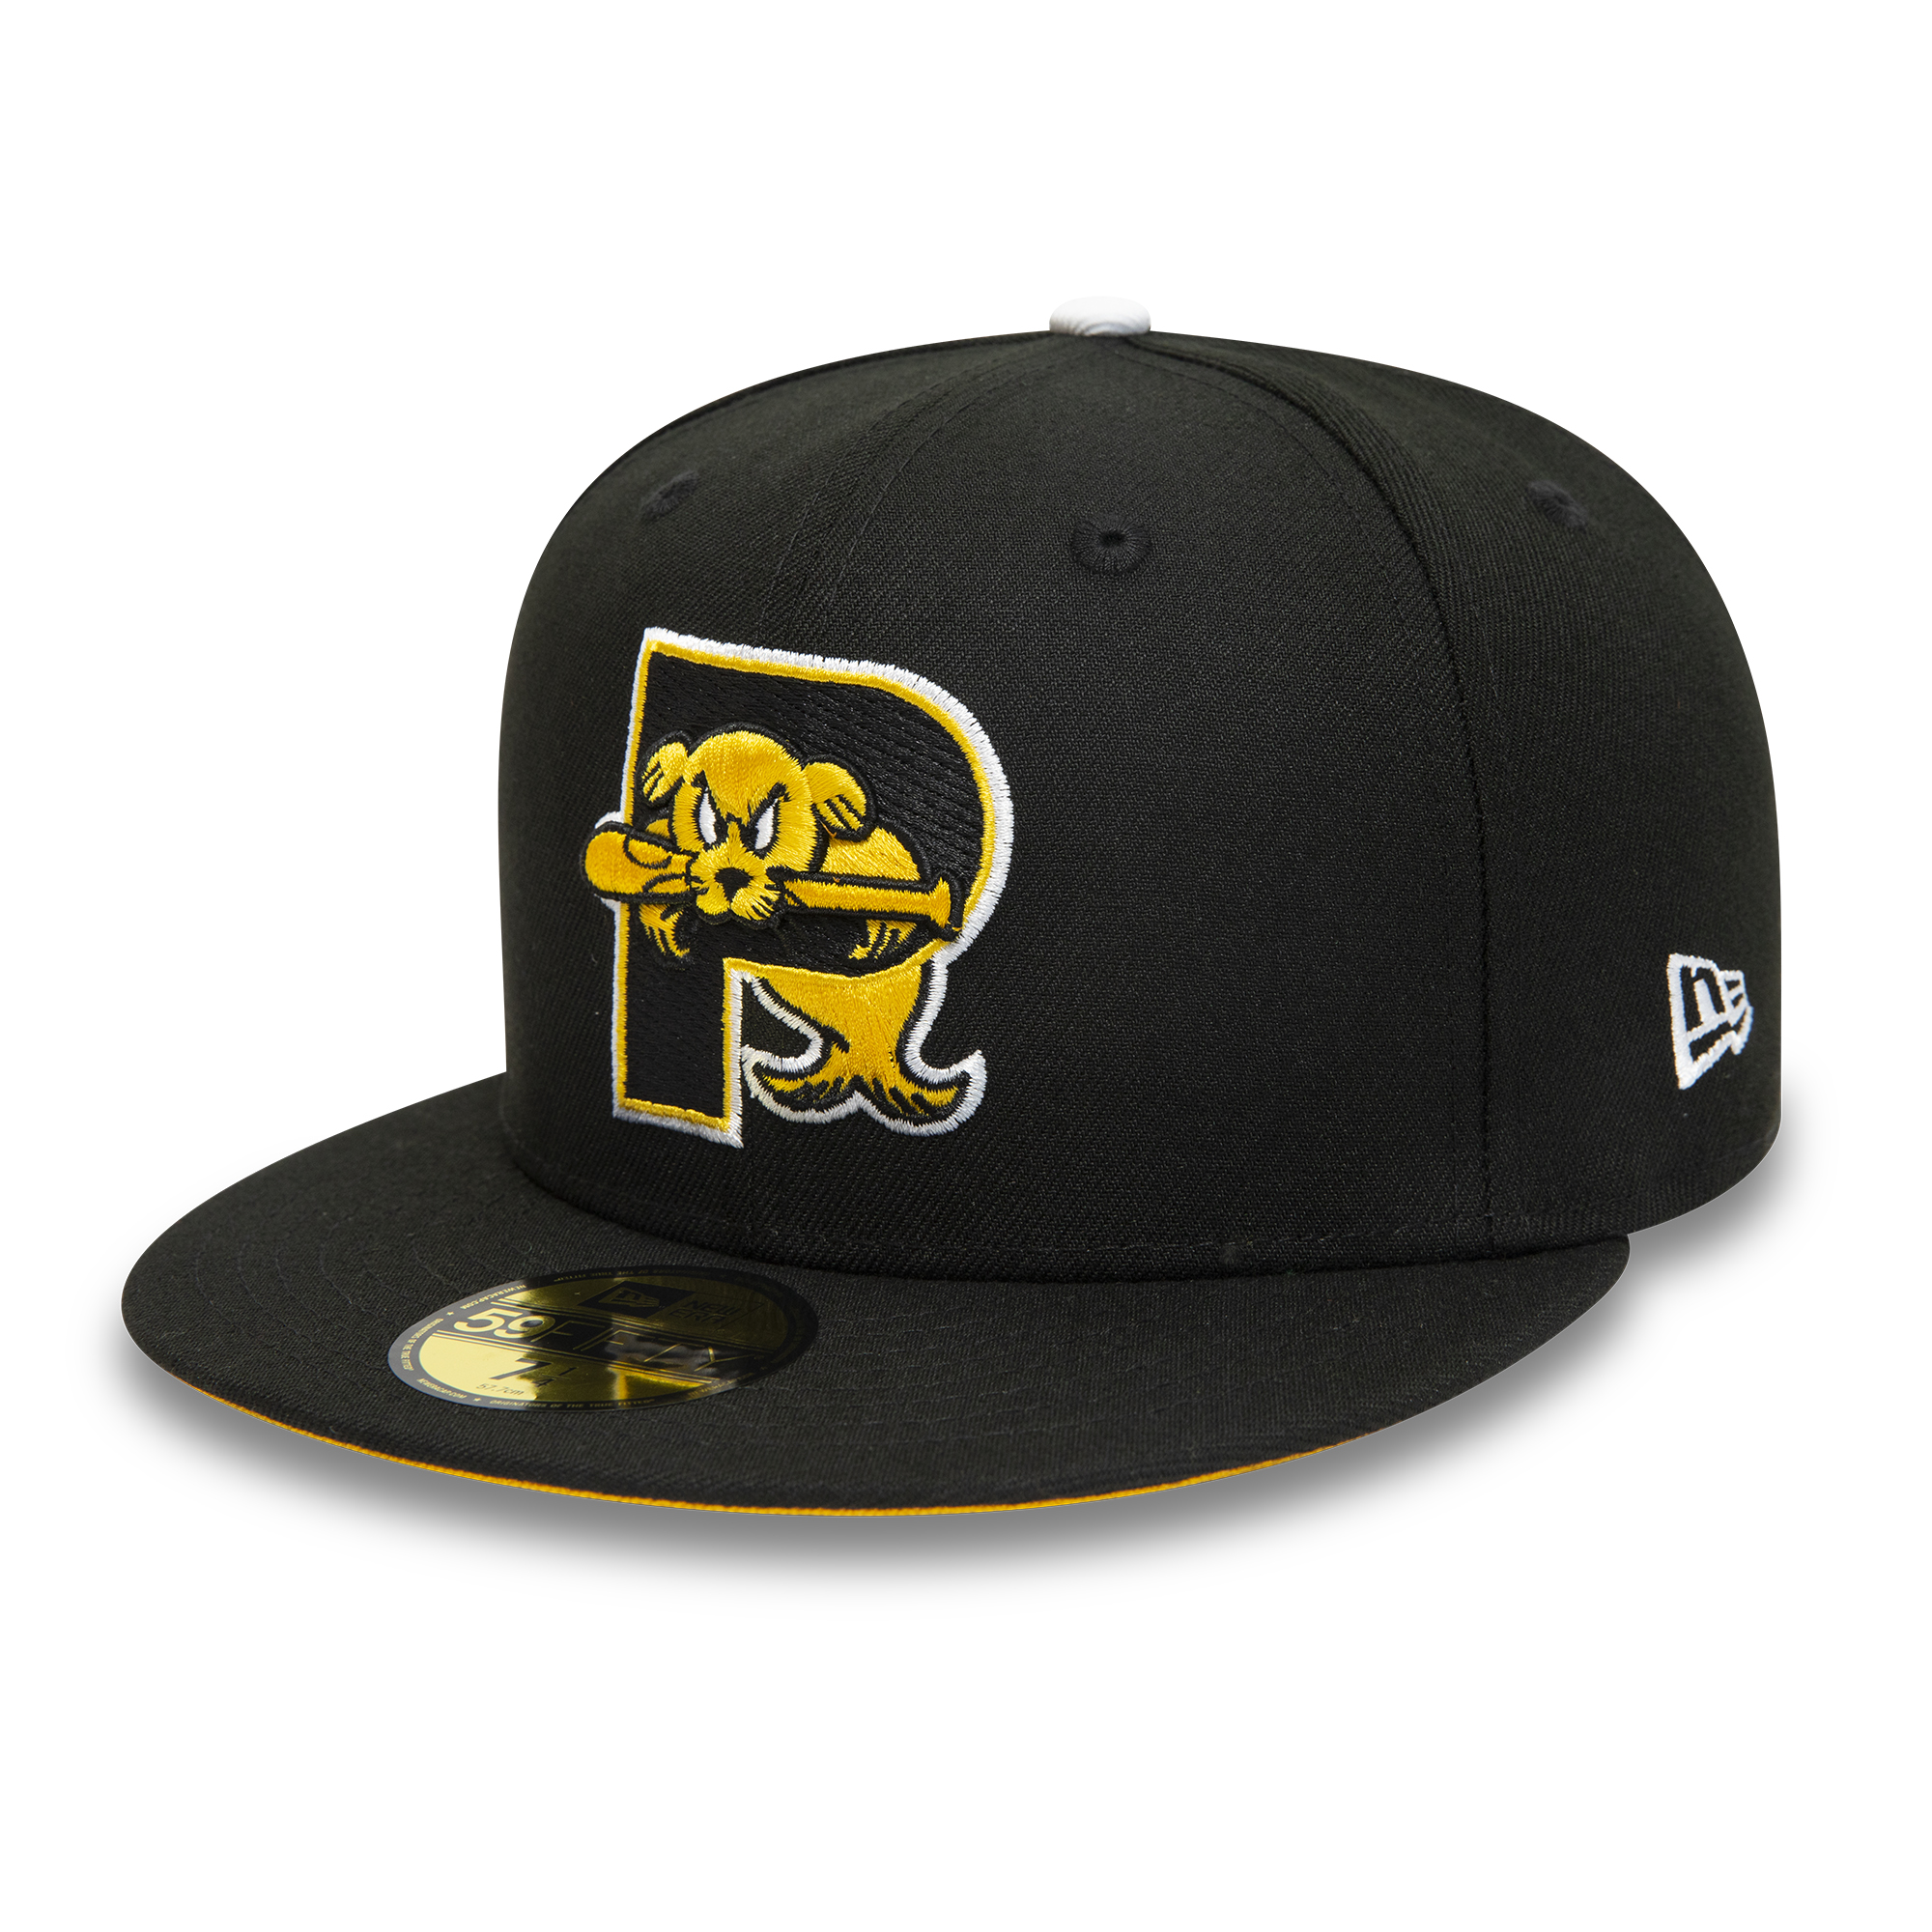 Official New Era Portland Sea Dogs MiLB Black 59FIFTY Fitted Cap B8382 ...